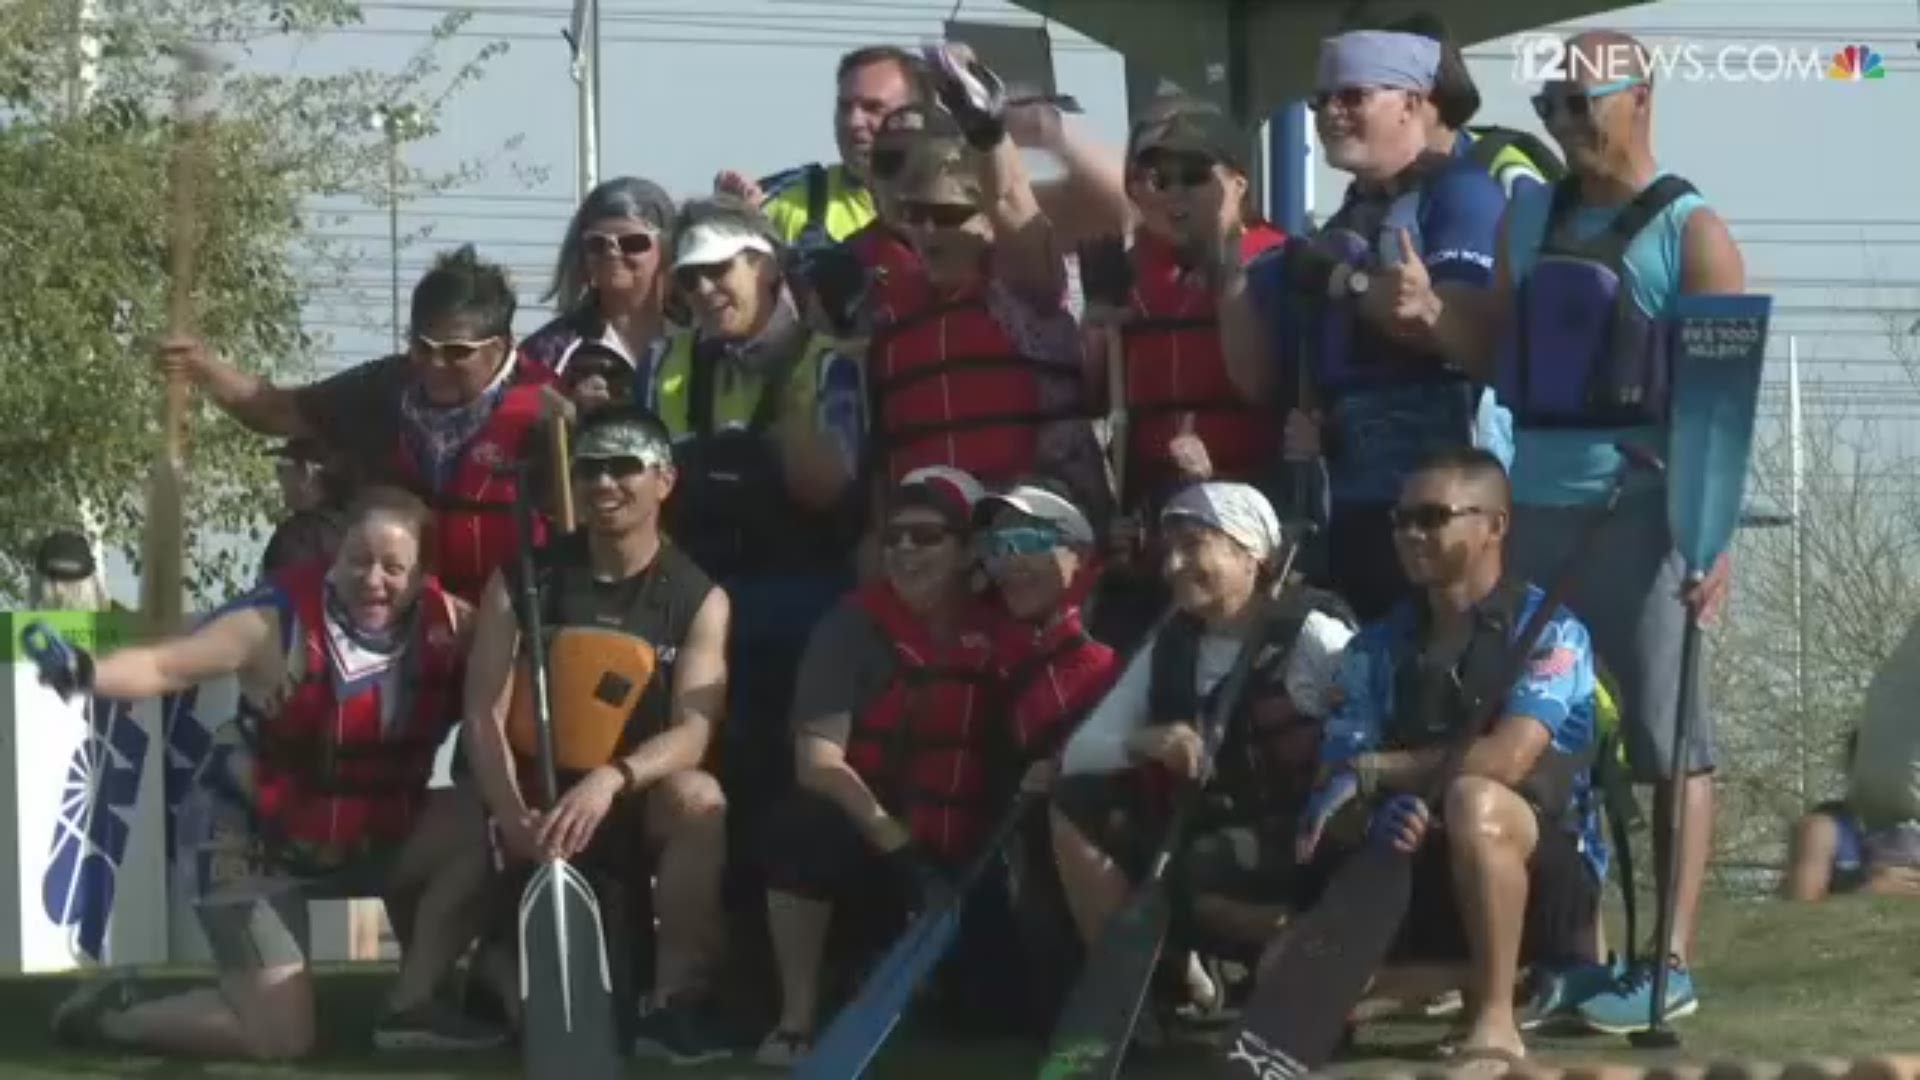 Paddlers from all over traveled to the Valley to take part in the Dragon Boat Festival at Tempe Town Lake over the weekend.